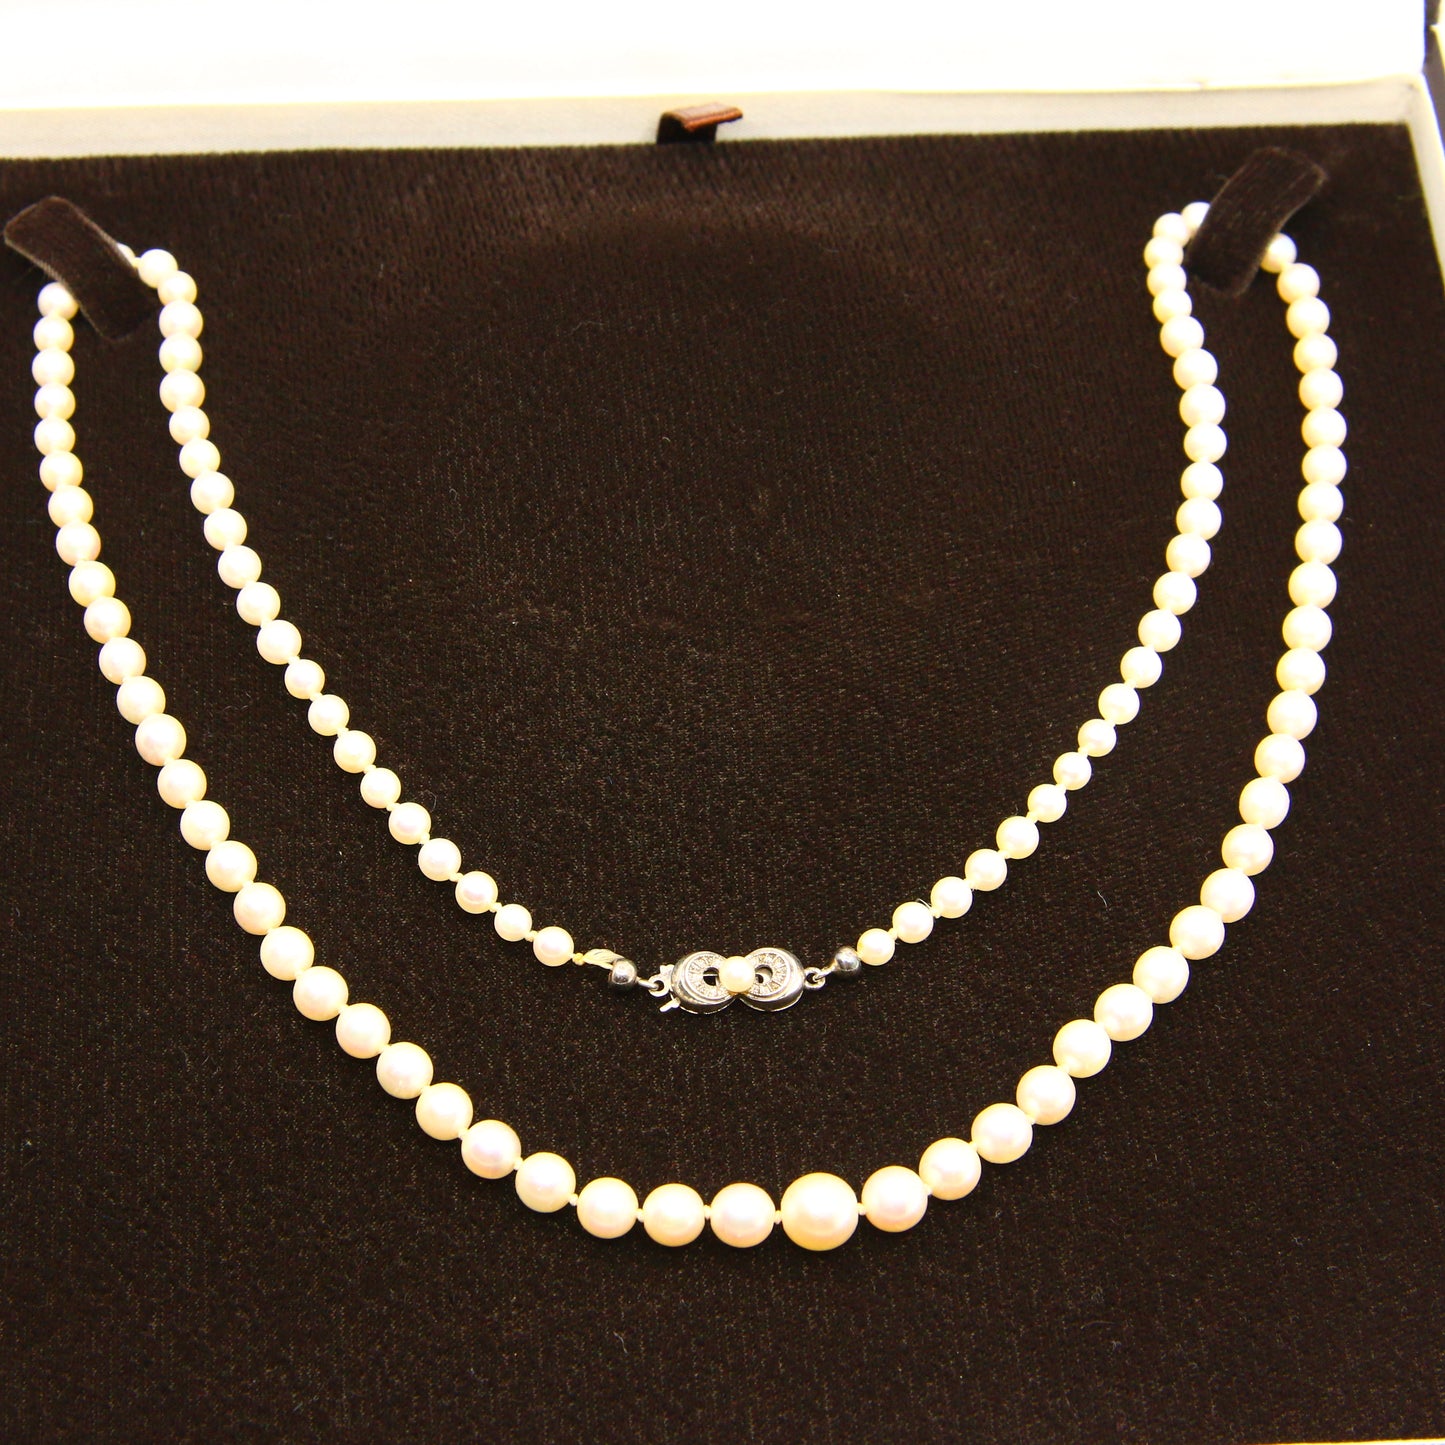 Vintage Pearl Necklace 25 inch Silver Clasp Graduated Beads Boxed